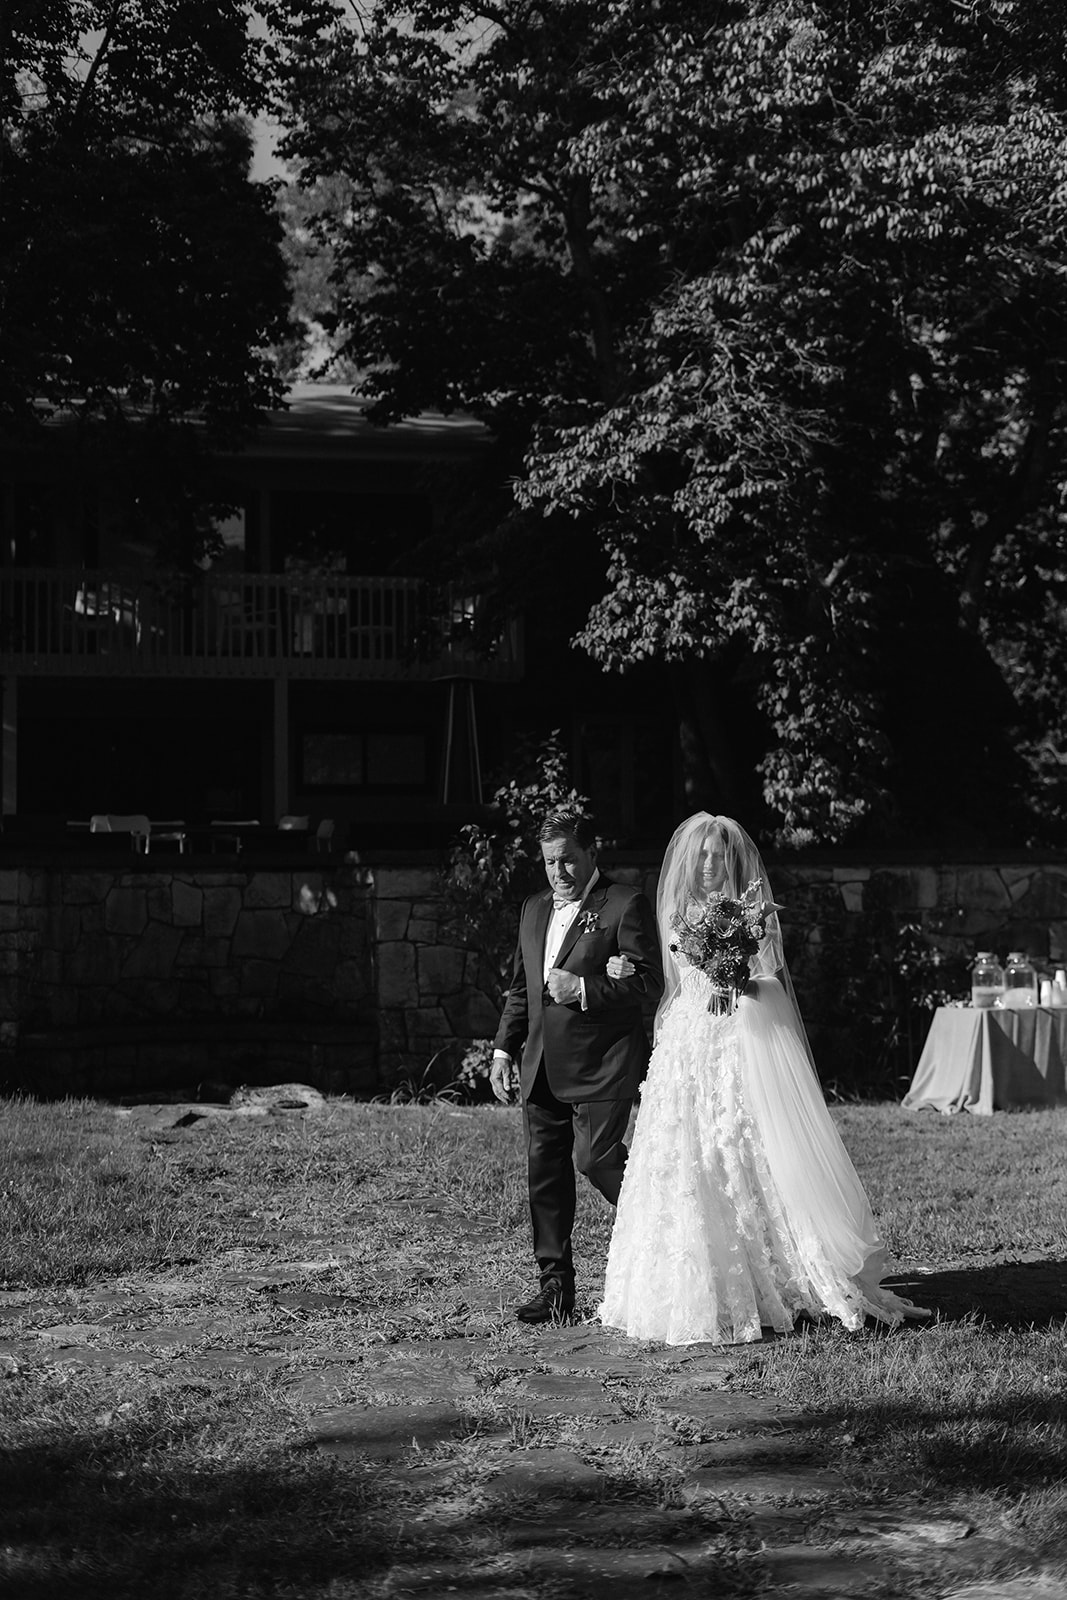 Bride and her father walking down the aisle at Troutbeck's Walled Garden.